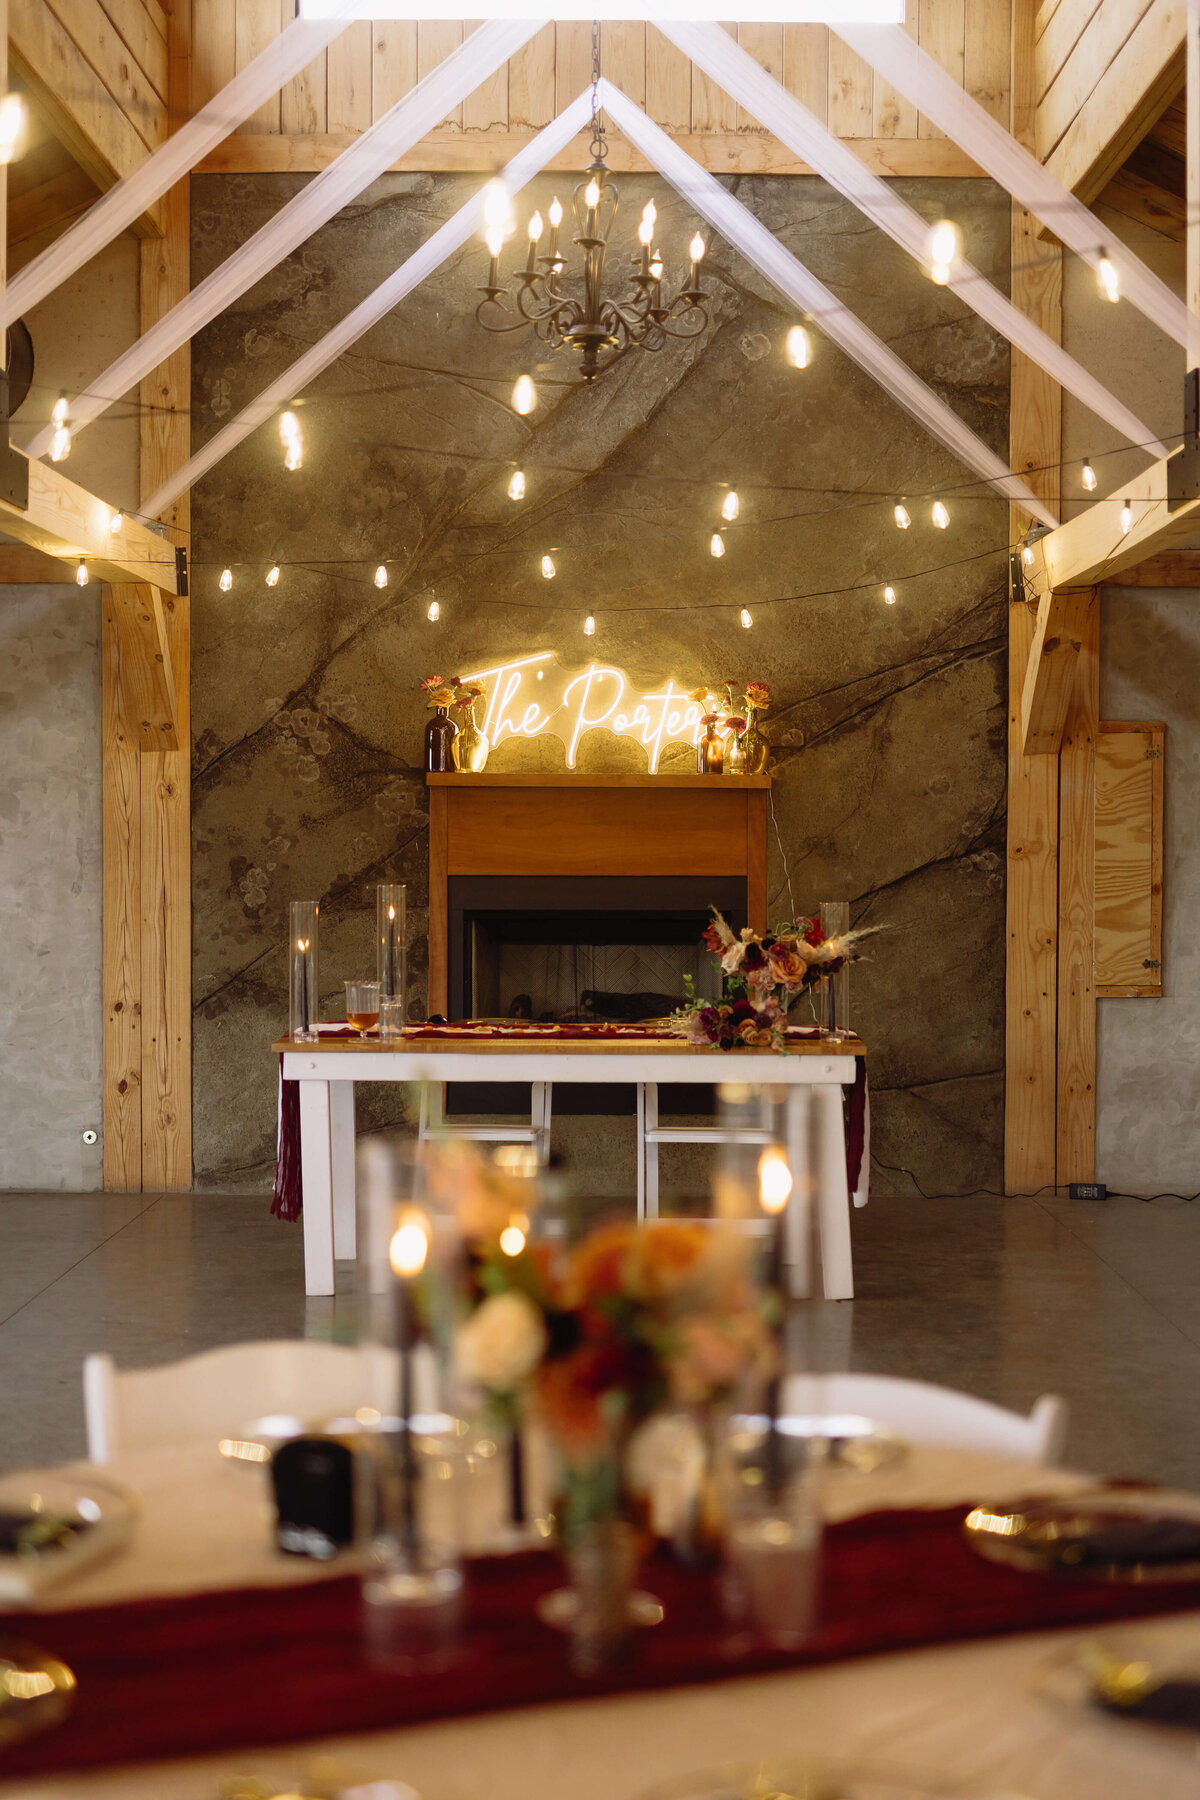 Charlottesville wedding venues indoor reception hall with white drapery and strin glights in the beams of the building with a large stone wall with a light sign of the couples last name on the stone and table scapes throughout the reception hall